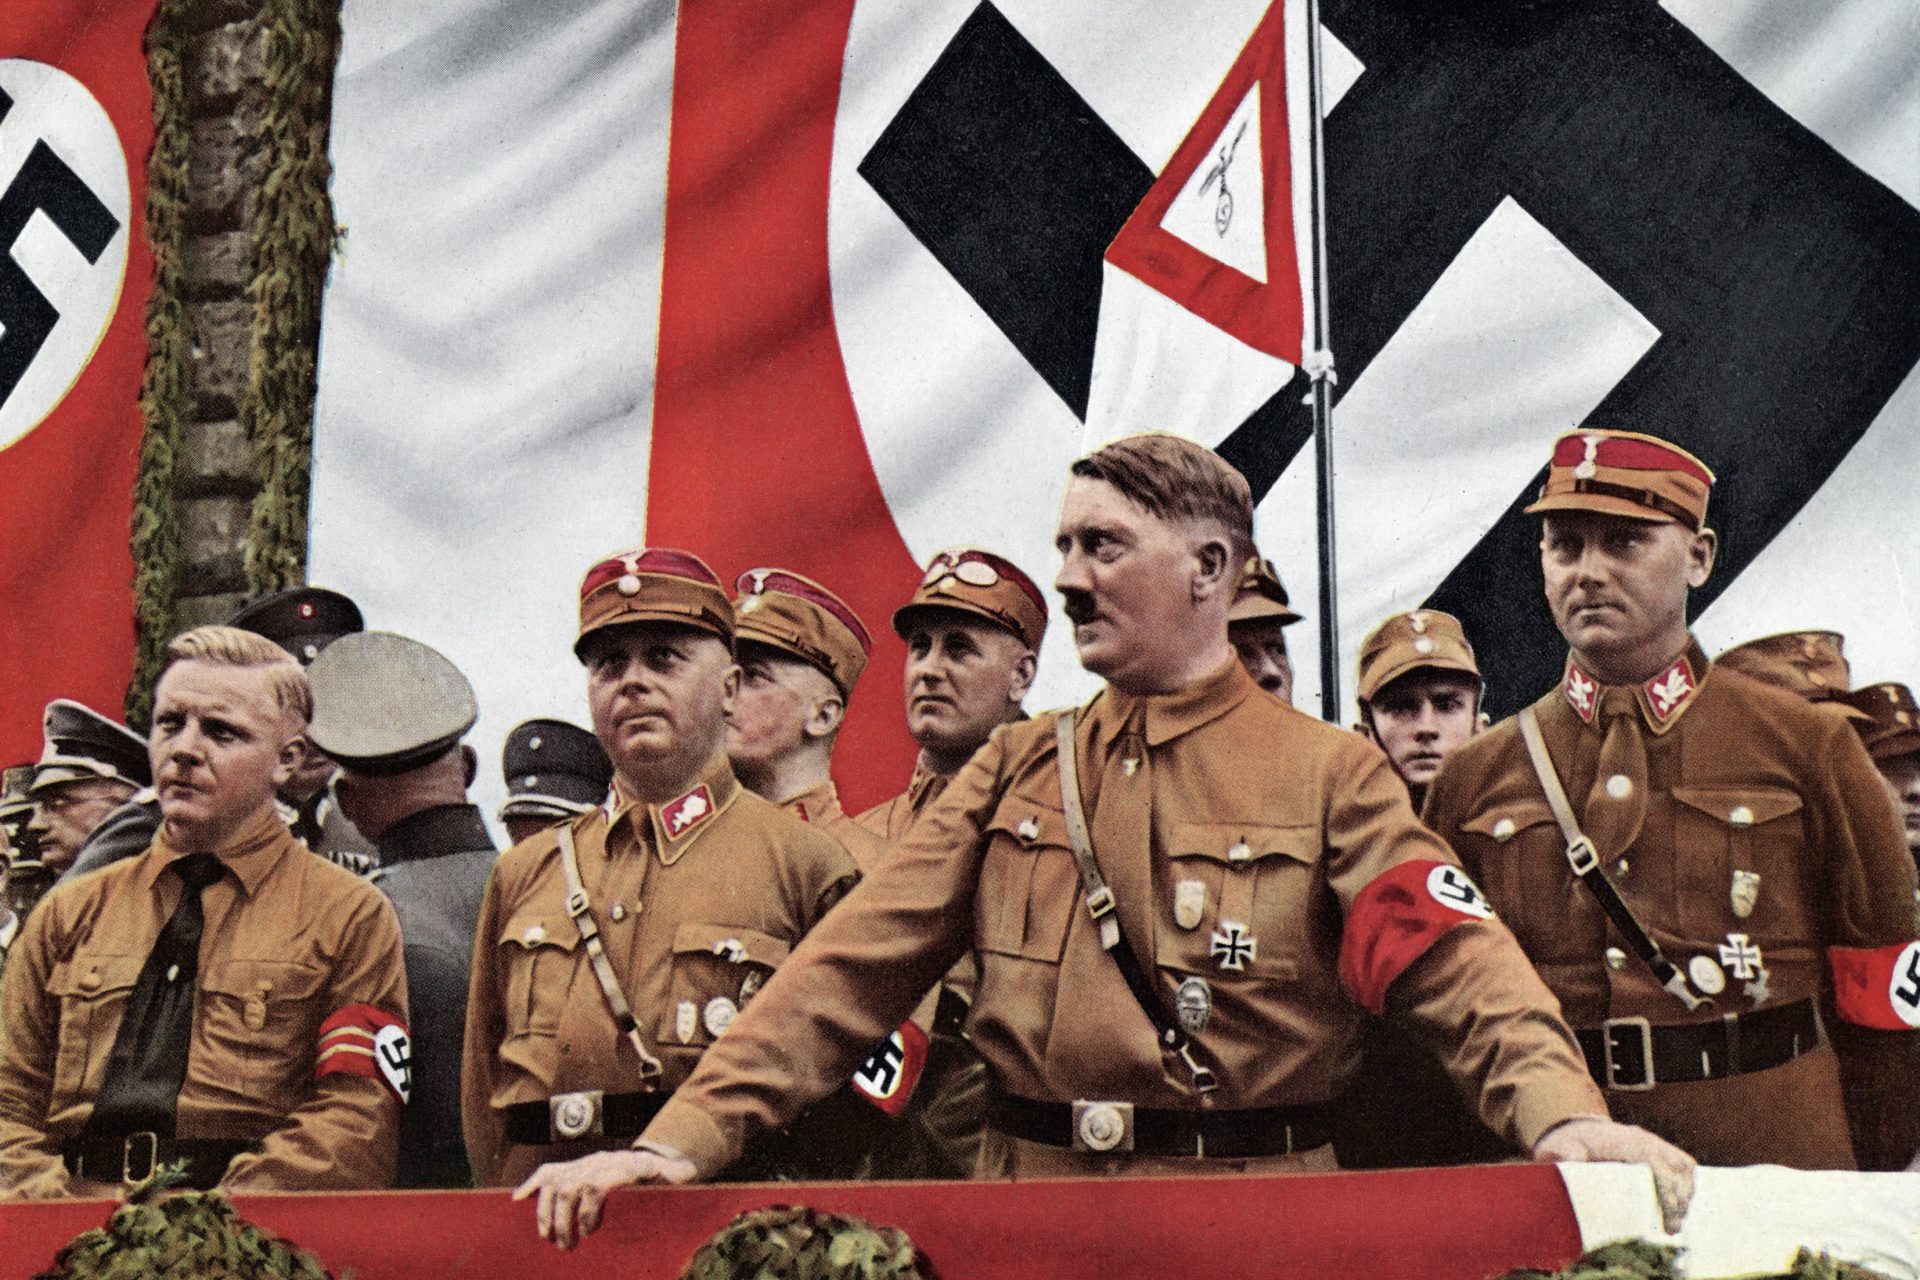 Unmaking history: What would have happened if Hitler won WW2?